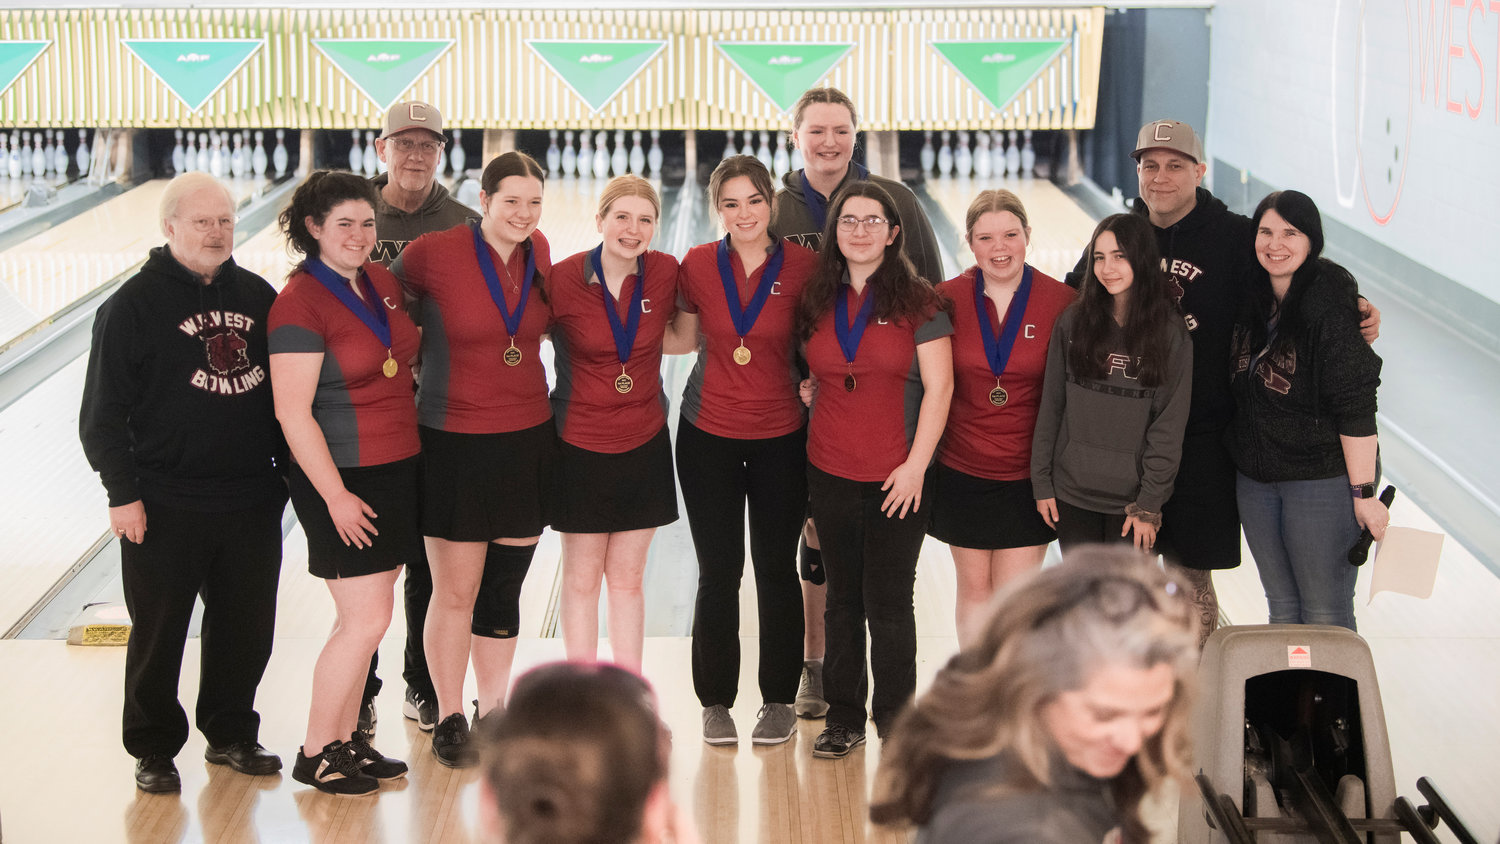 W.F. West bowlers took first place knocking down over 1,000 pins at Westside Lanes in Olympia.